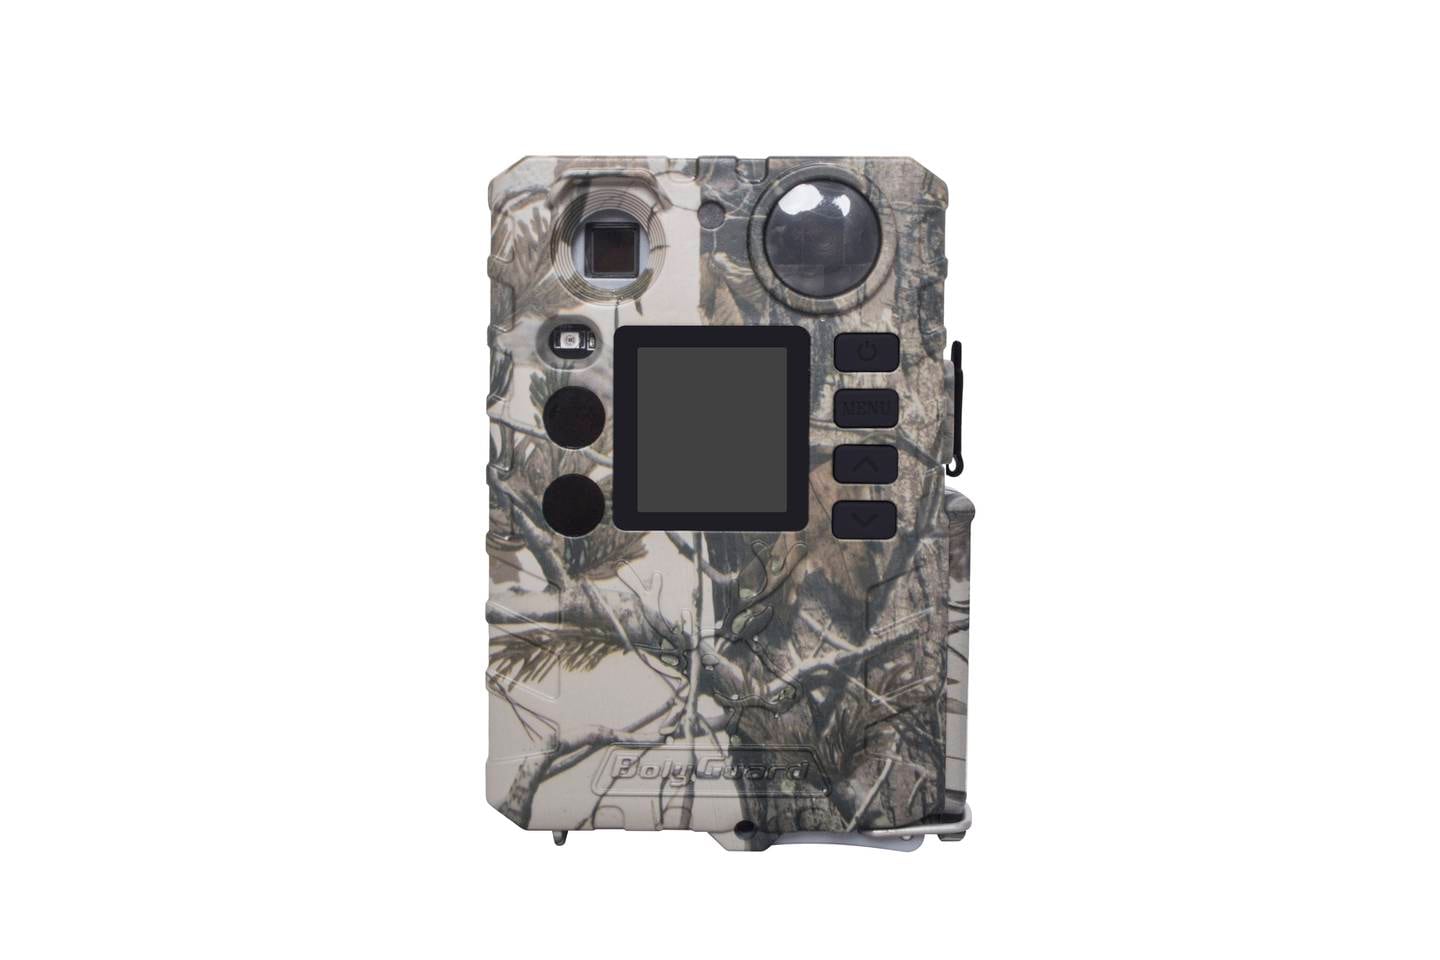 Game cameras can be bought very cheaply.  This game camera can be purchased 